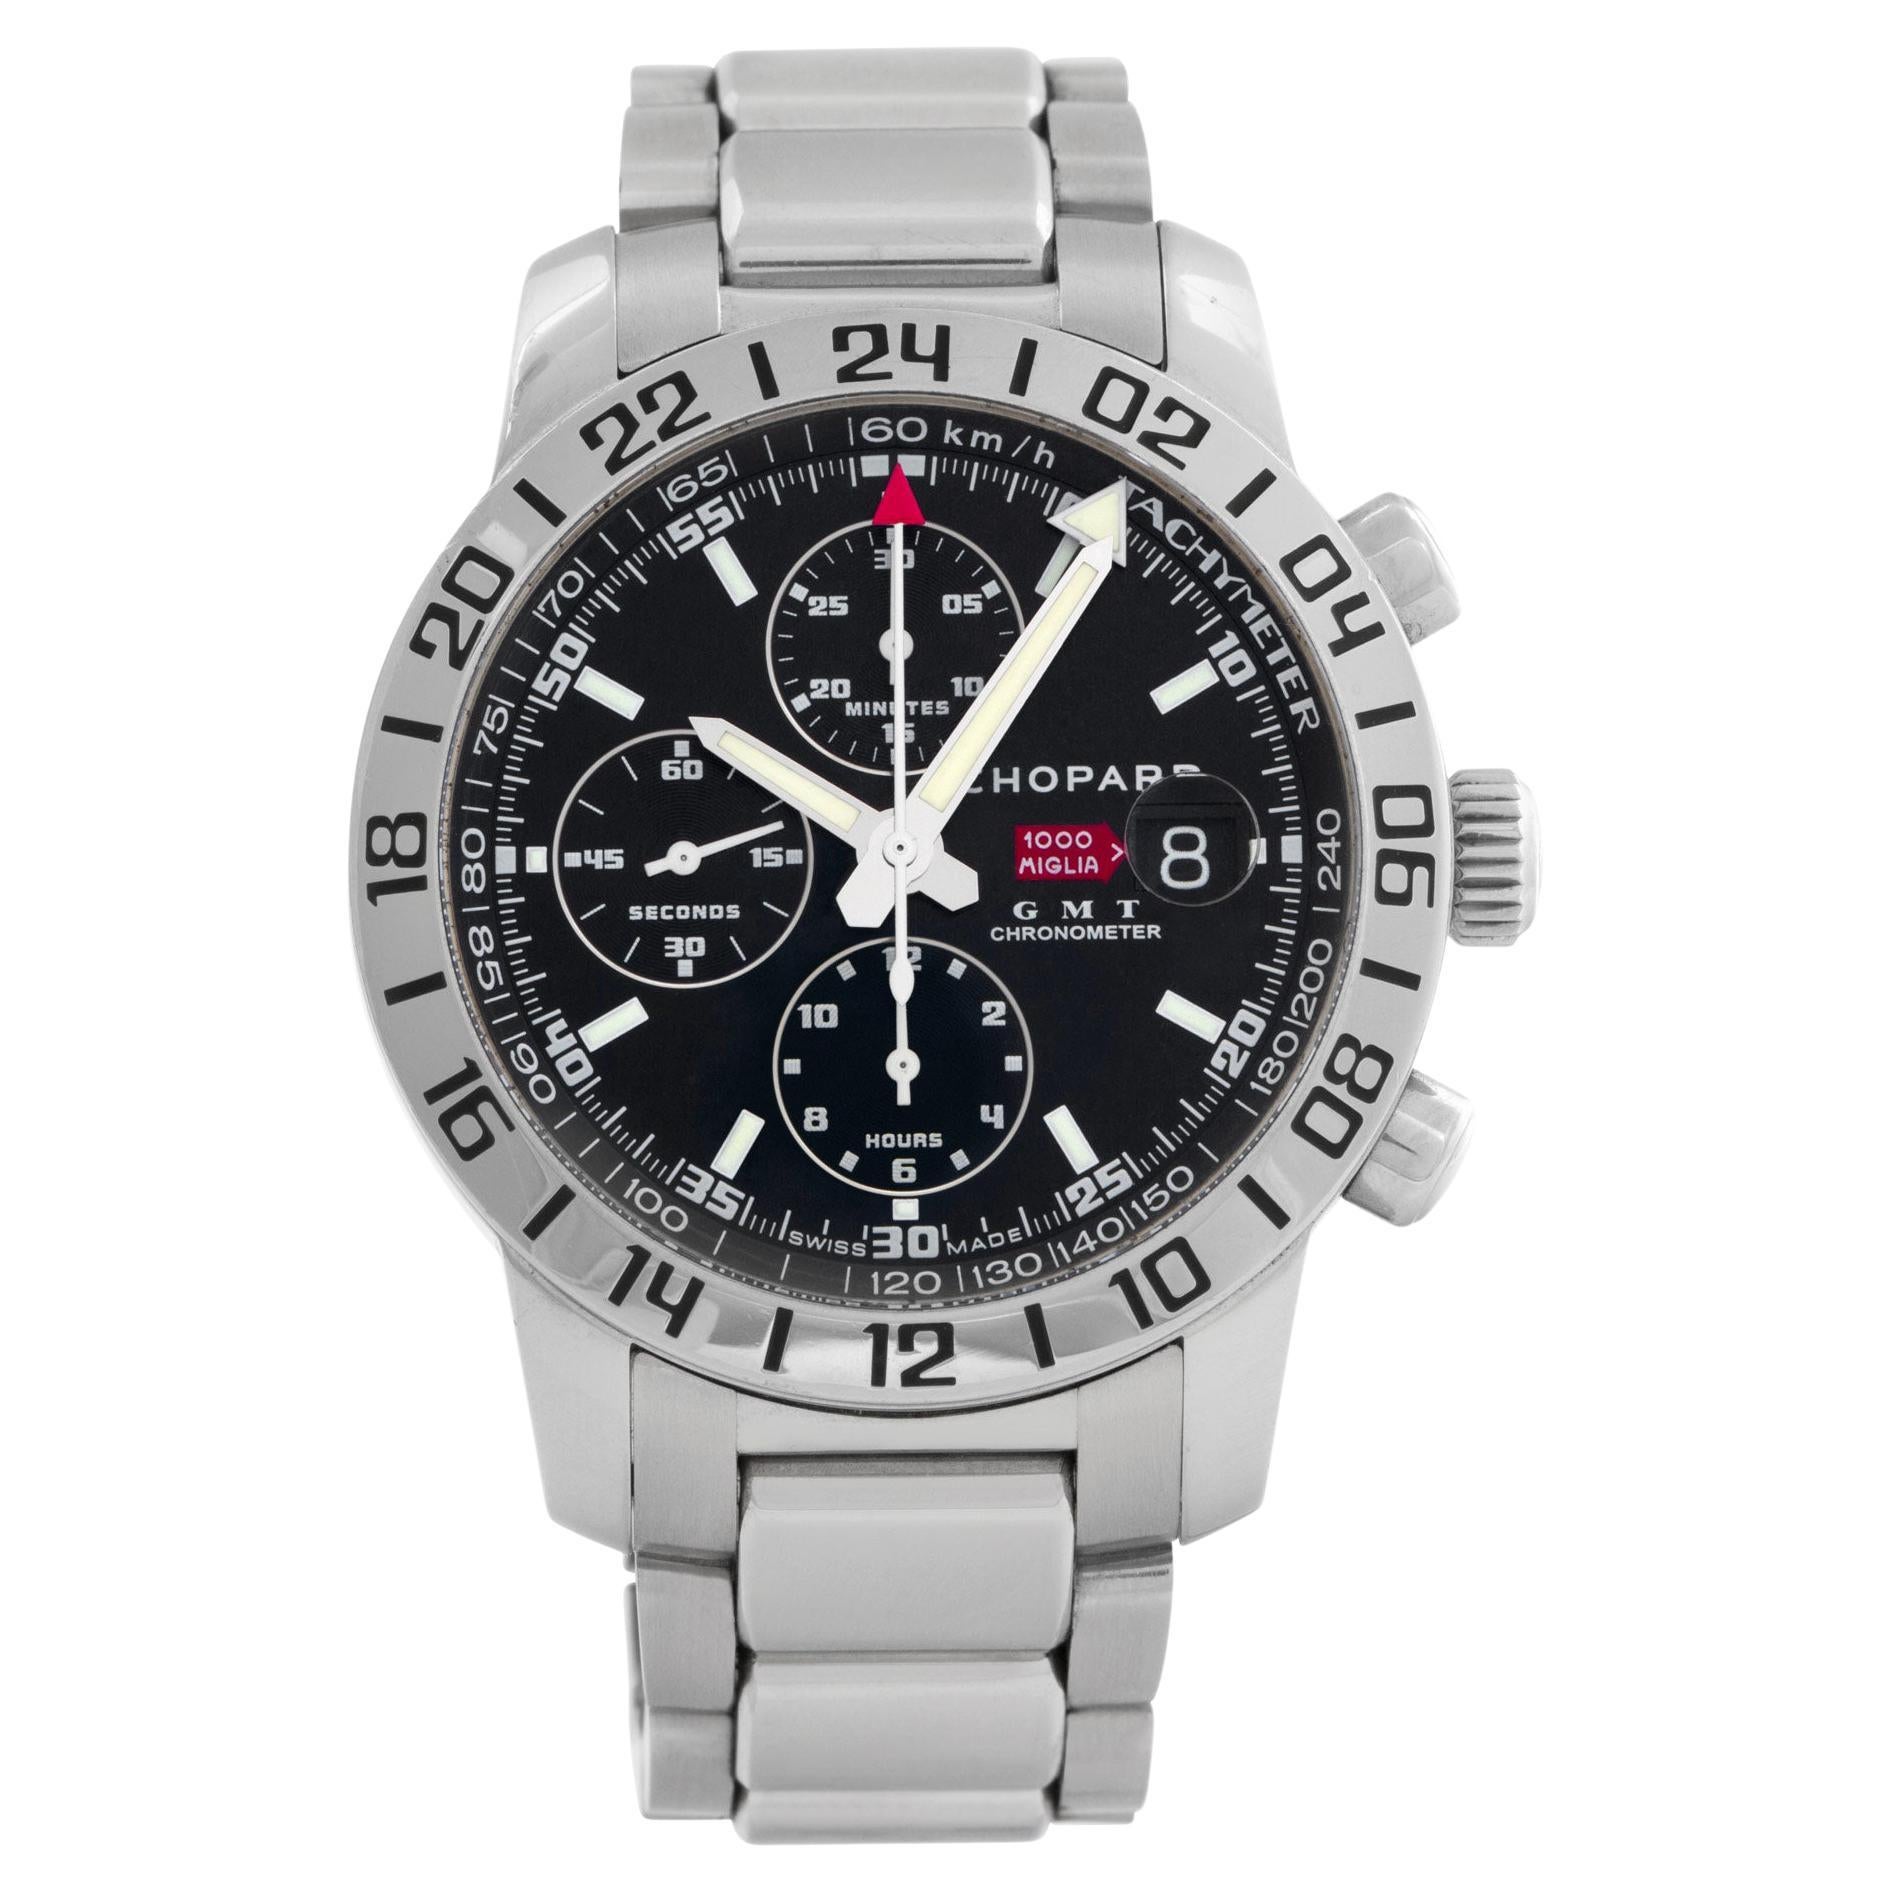 Chopard Mille Miglia REF. 158992-3001 GMT Chronograph in Stainless Steel For Sale